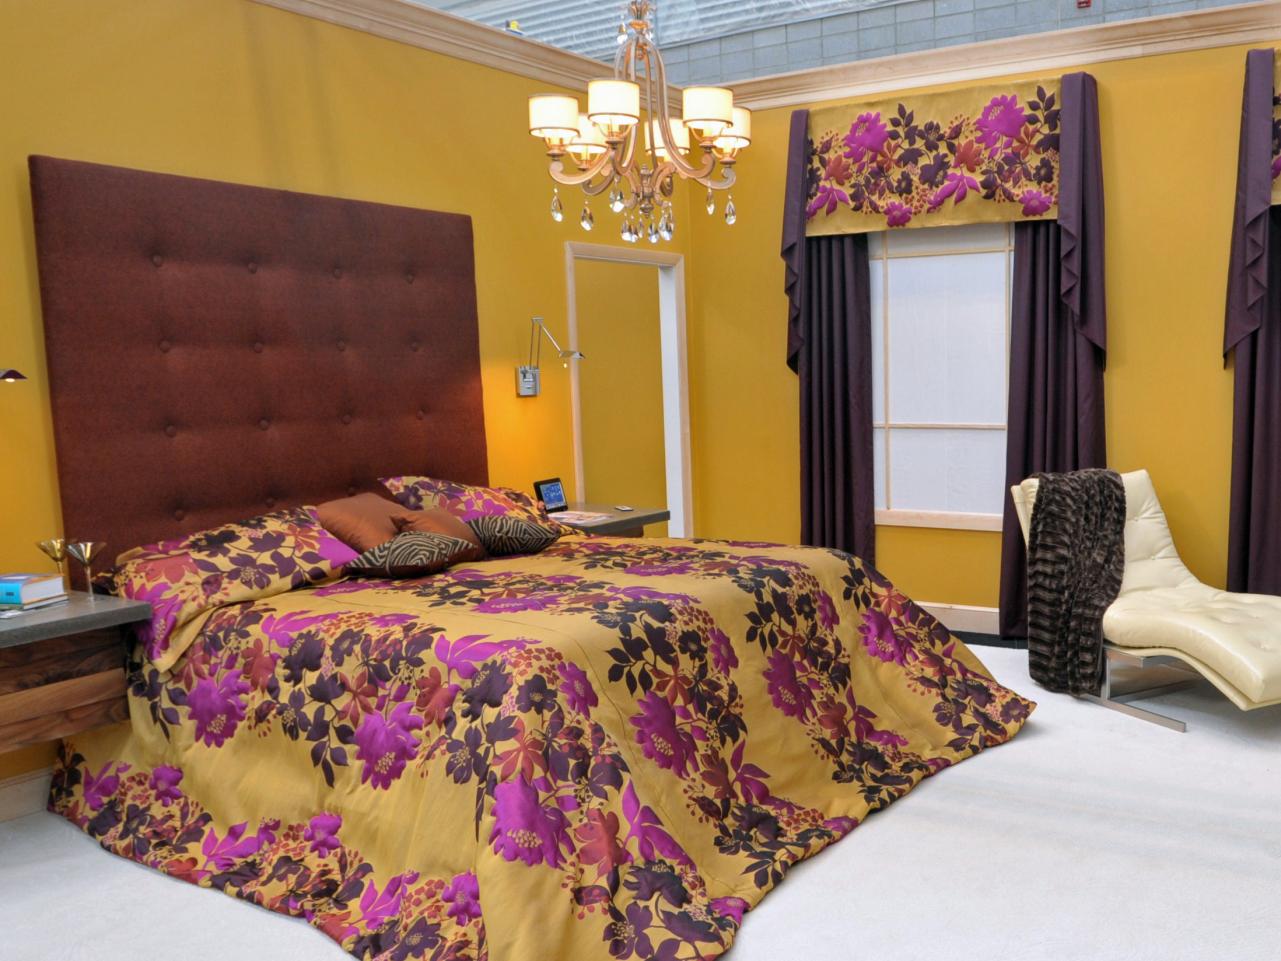 Minimalist Purple And Yellow Bedroom Ideas for Small Space